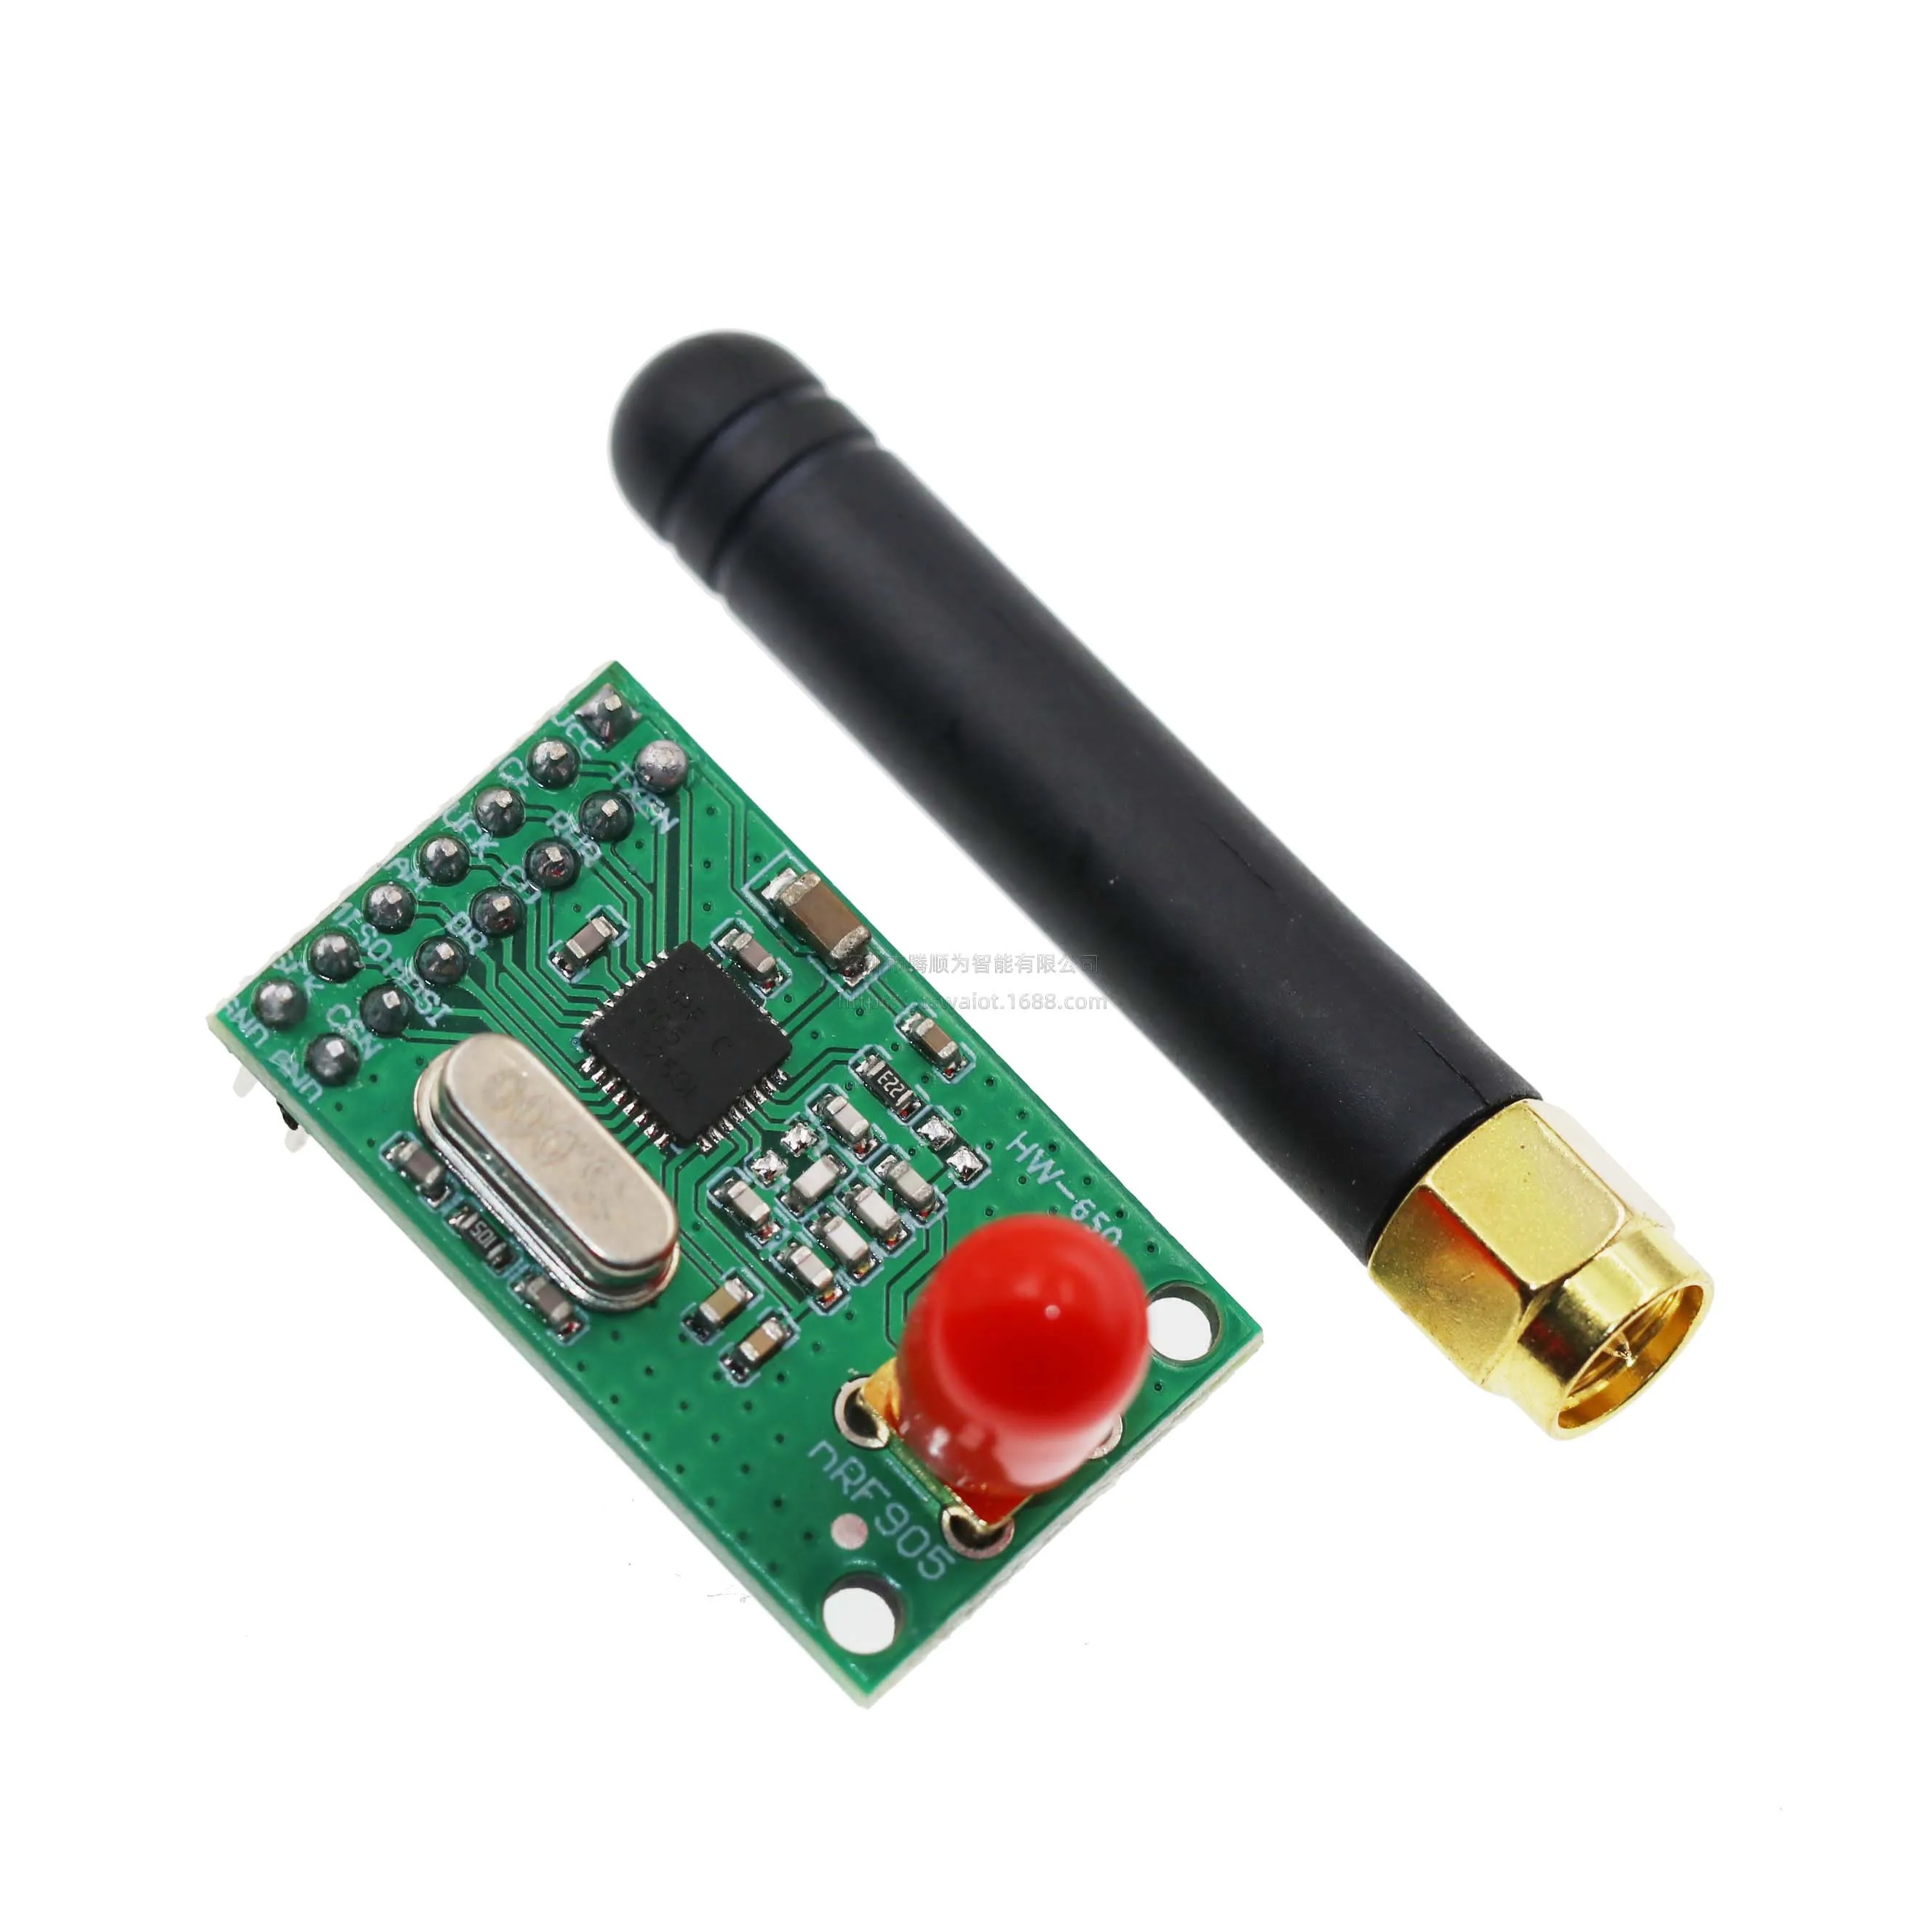 NRF905 Wireless Transceiver Module Wireless Transmitter Receiver Board NF905SE With Antenna FSK GMSK Low Power 433 868 915 MHz images - 6